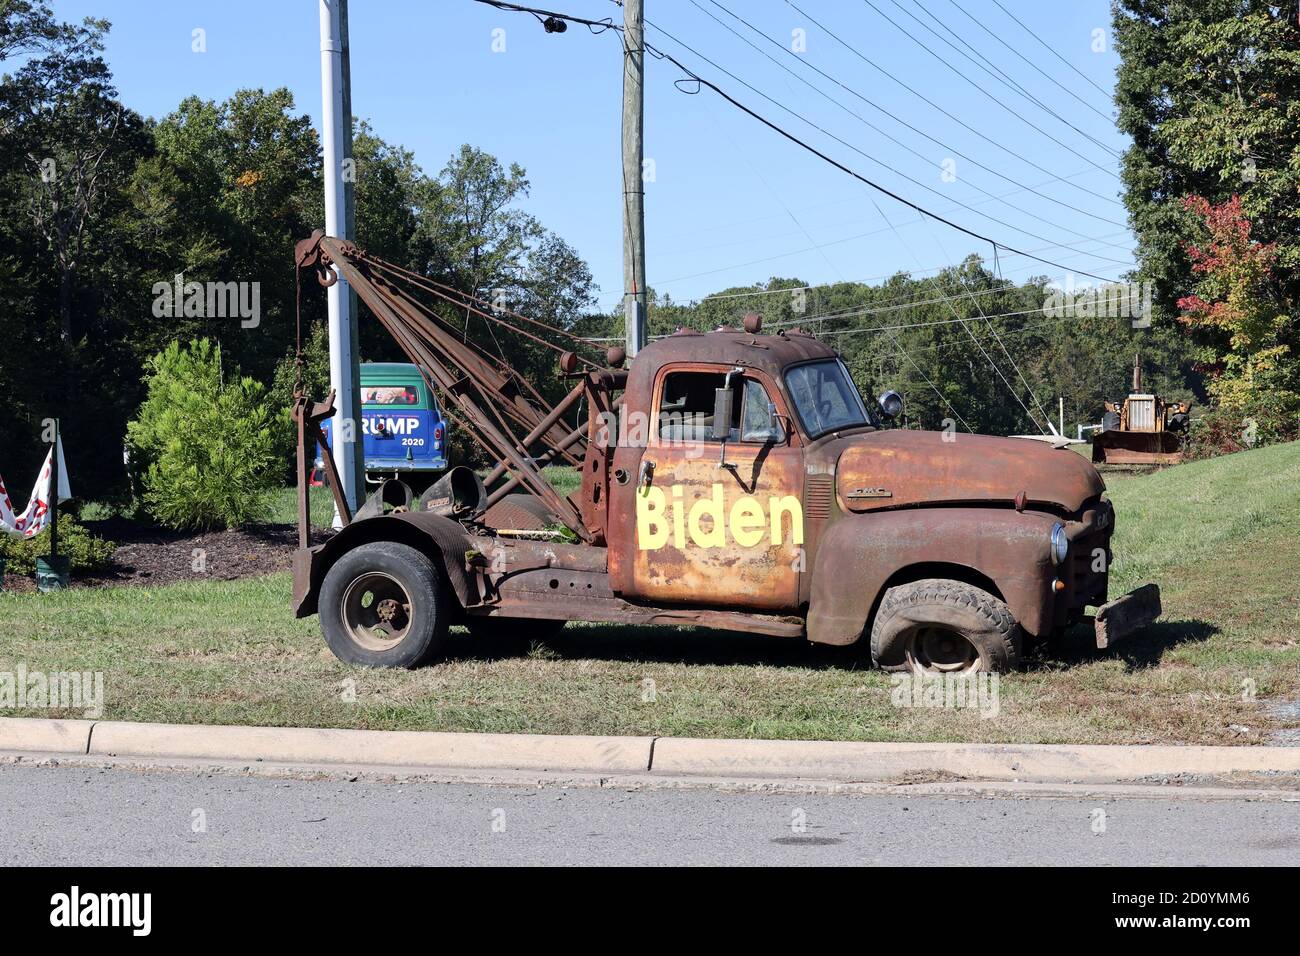 Dumfries. VA, USA. 3rd Oct, 2020. View of an old run down truck with a Biden sign created by Trump supporters on October 3, 2020 in Dumfries, Virginia. Credit: Mpi34/Media Punch/Alamy Live News Stock Photo